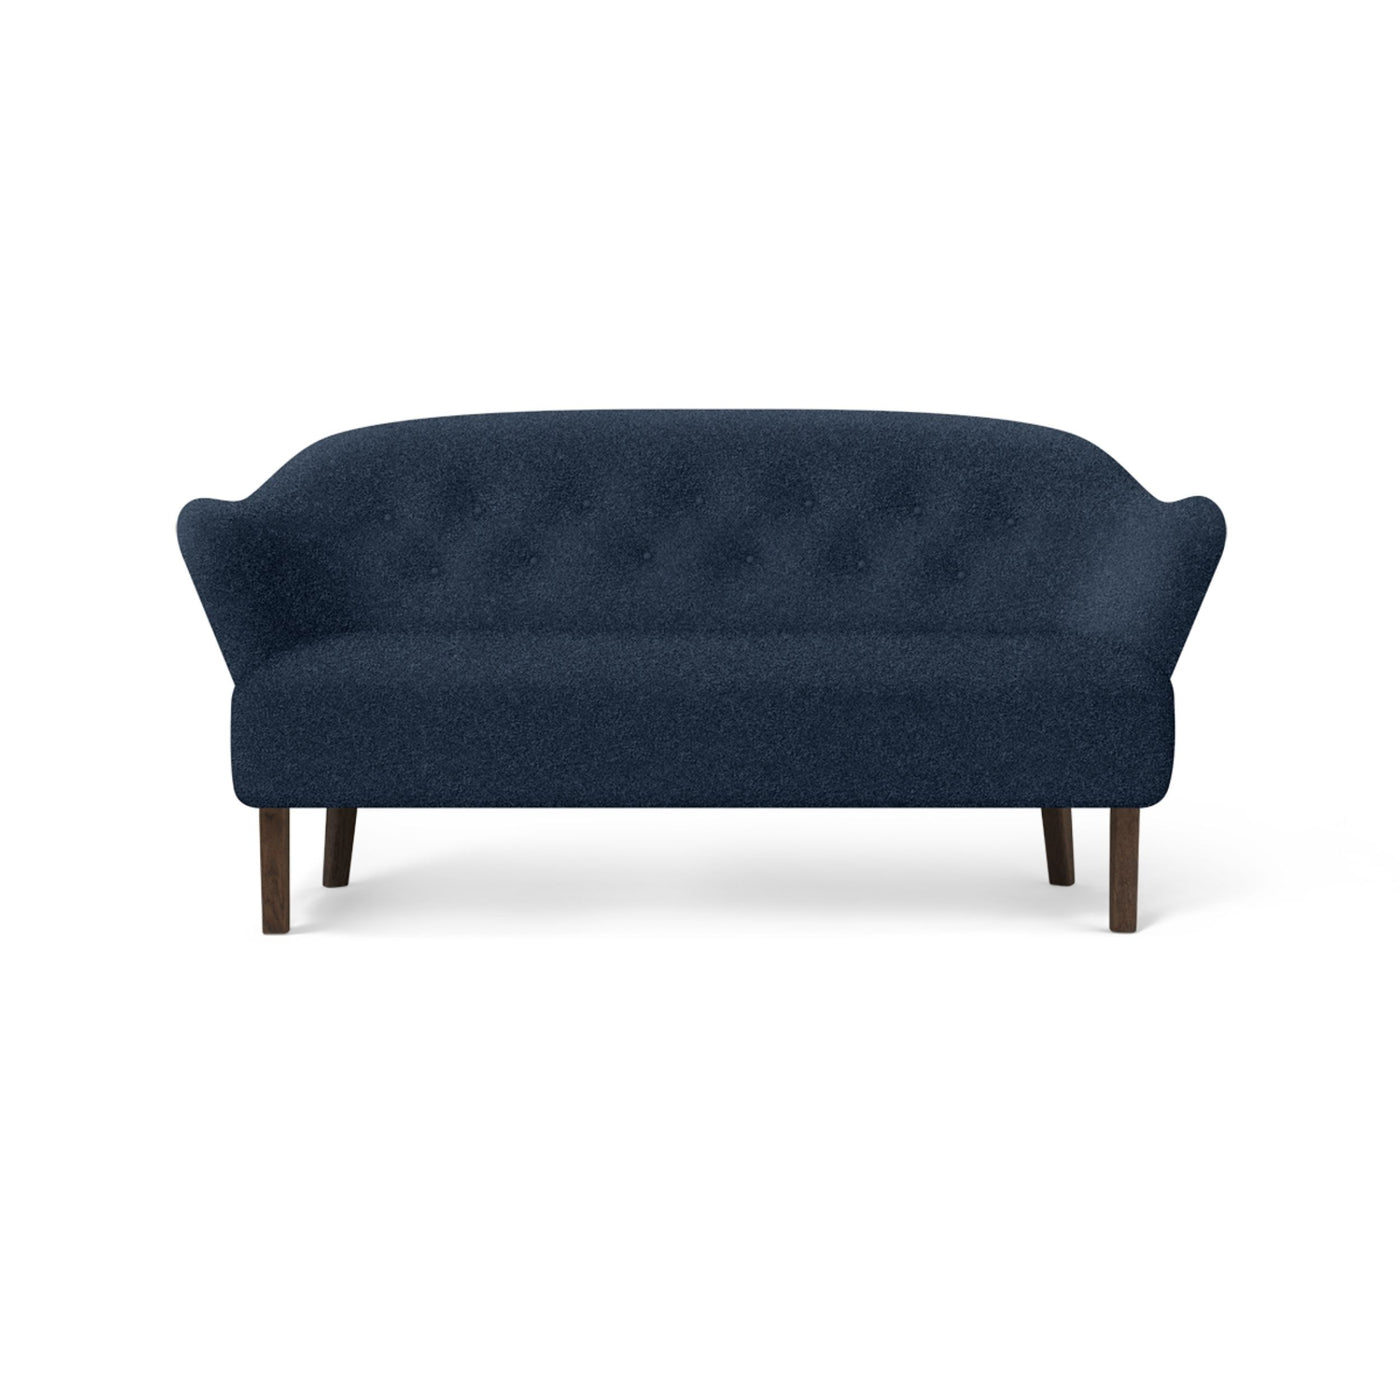 By Lassen Ingeborg sofa with smoked oak legs. Made to order from someday designs. #colour_sahco-zero-6